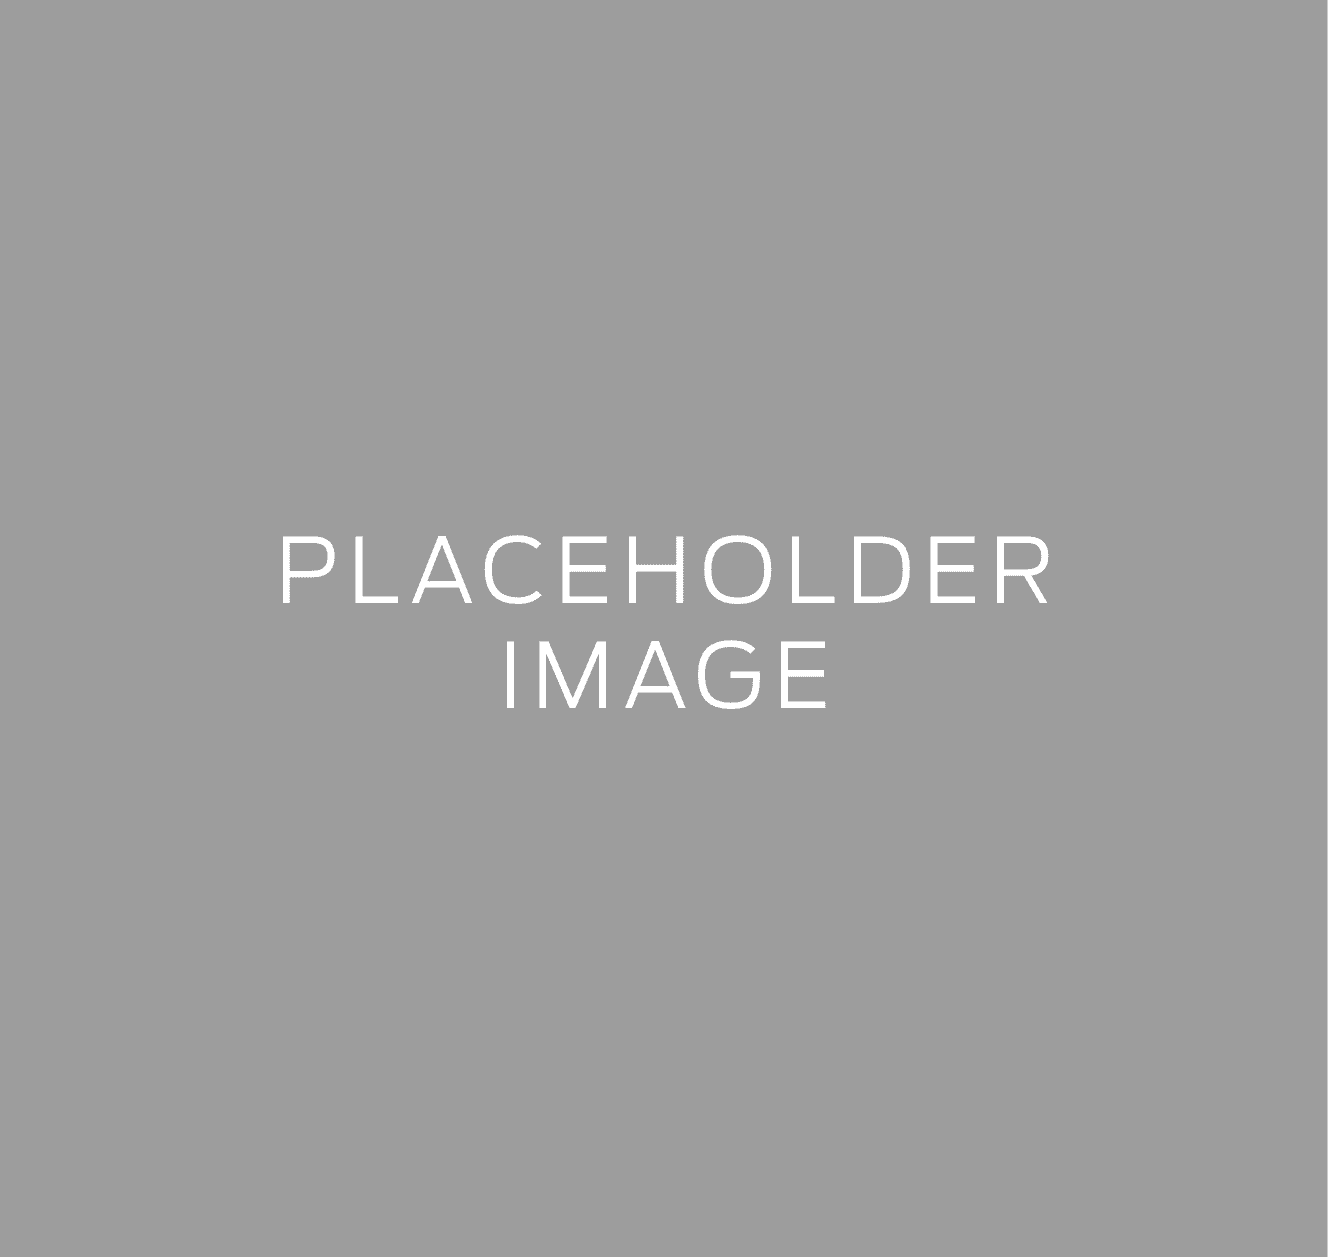 Industry-B-placeholder-image